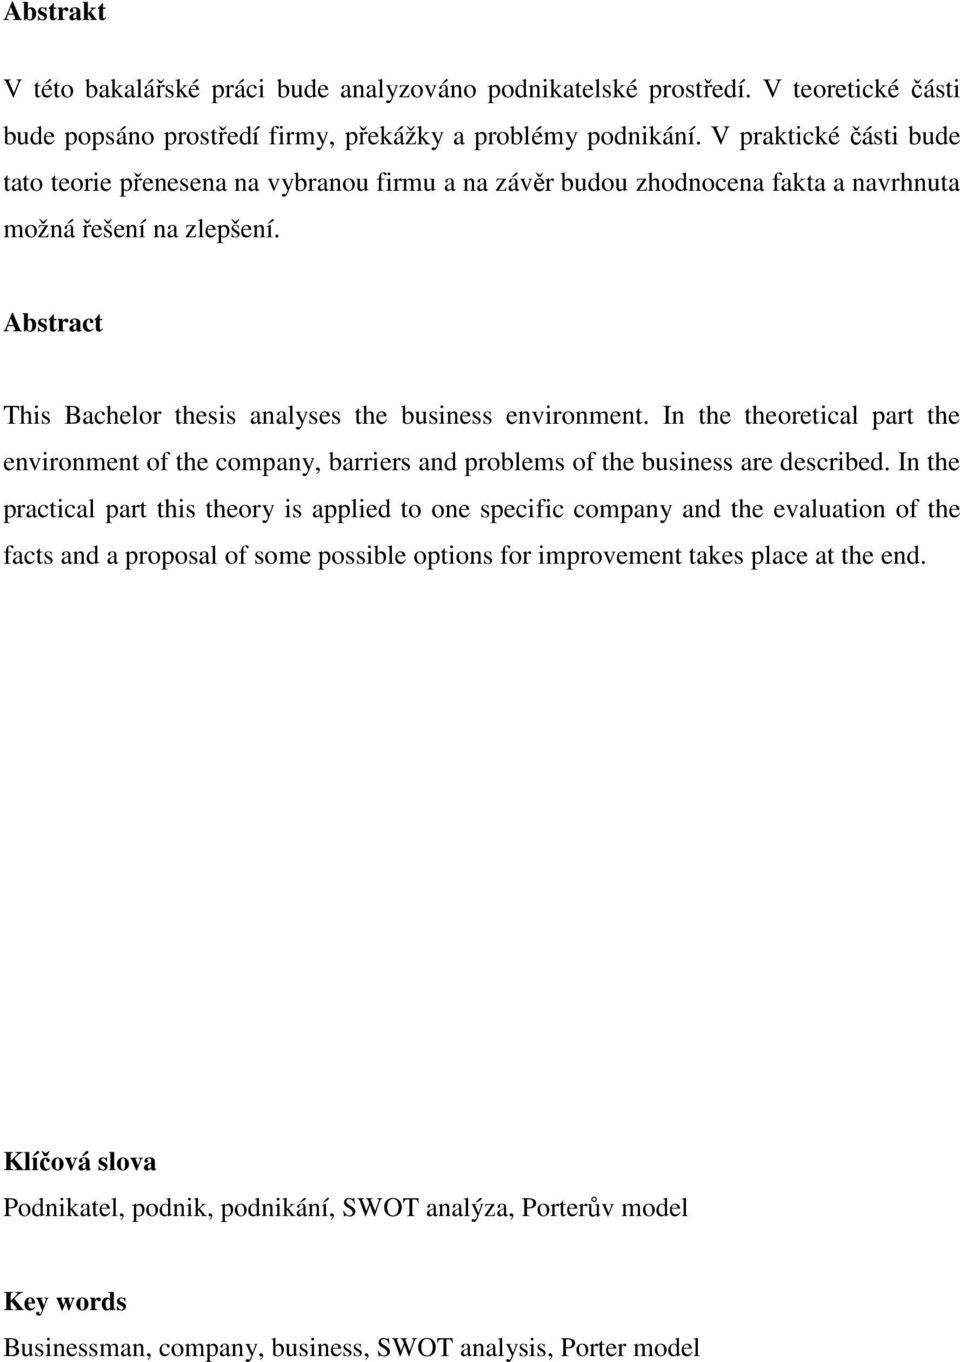 Abstract This Bachelor thesis analyses the business environment. In the theoretical part the environment of the company, barriers and problems of the business are described.